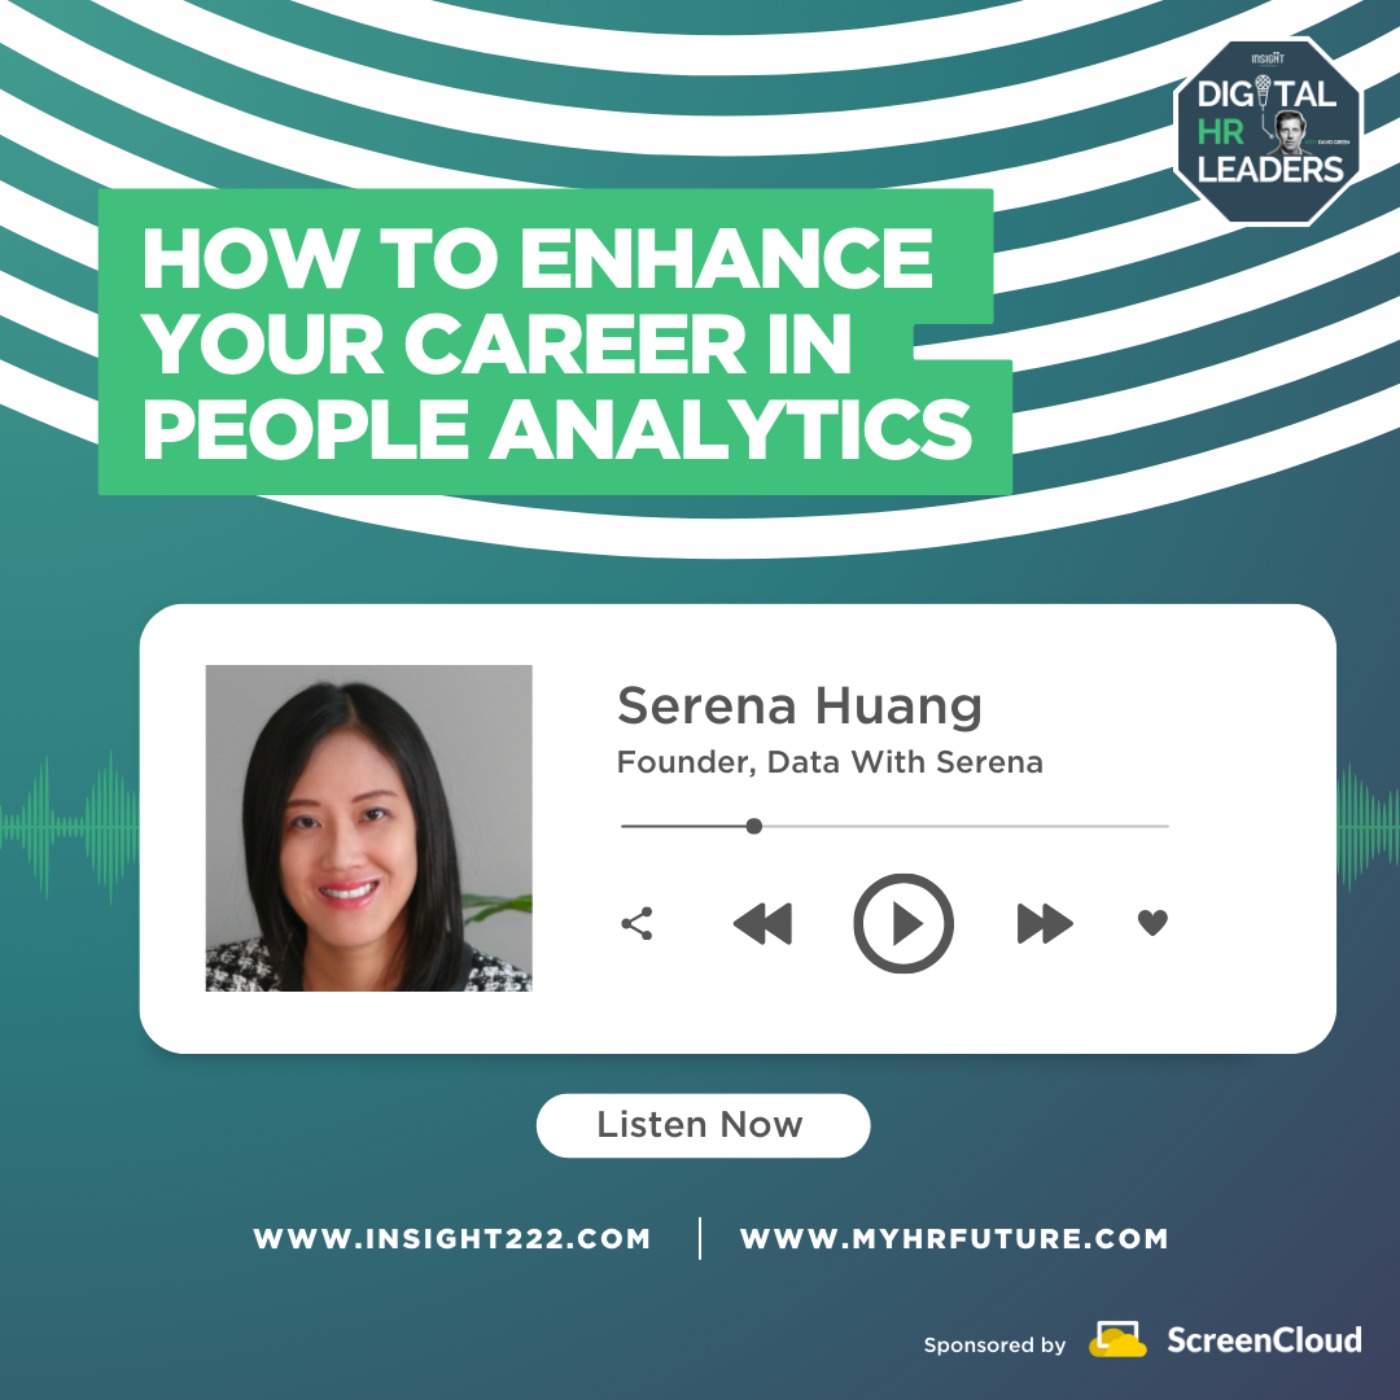 How to Enhance Your Career in People Analytics (an Interview with Serena Huang)